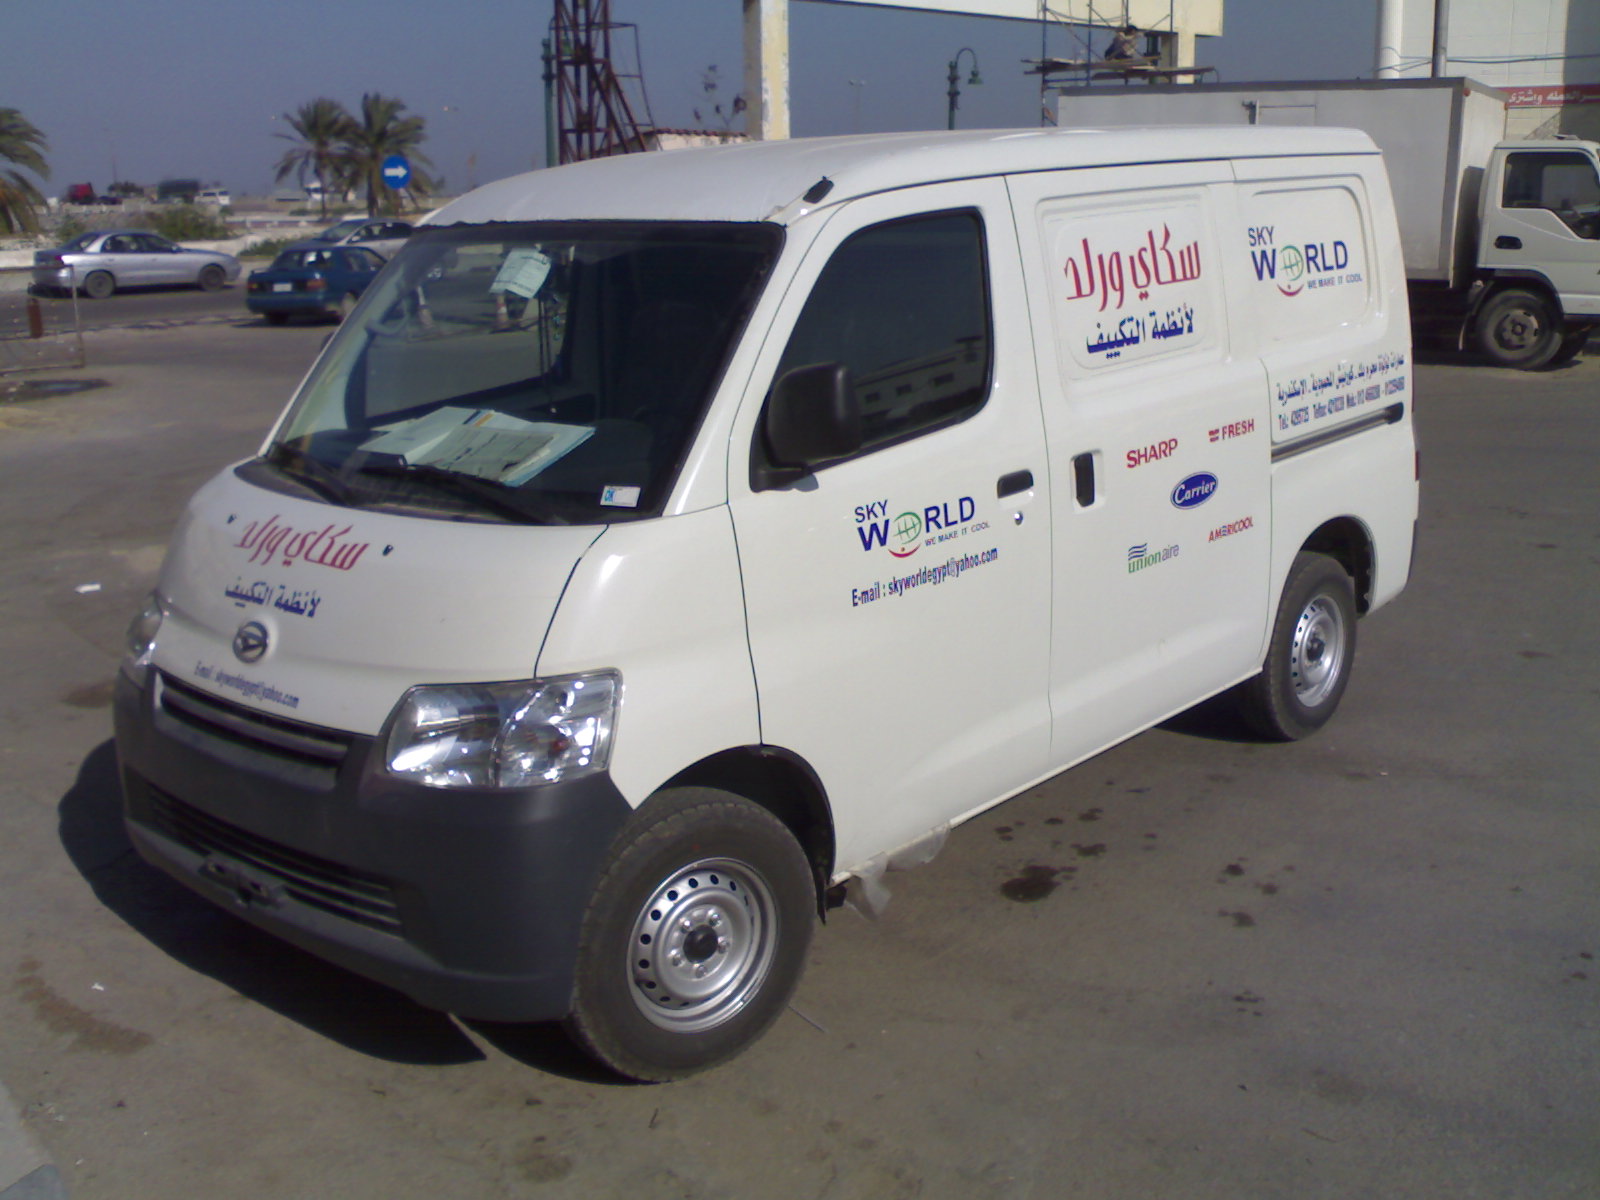 Sky World Air Conditioning Systems